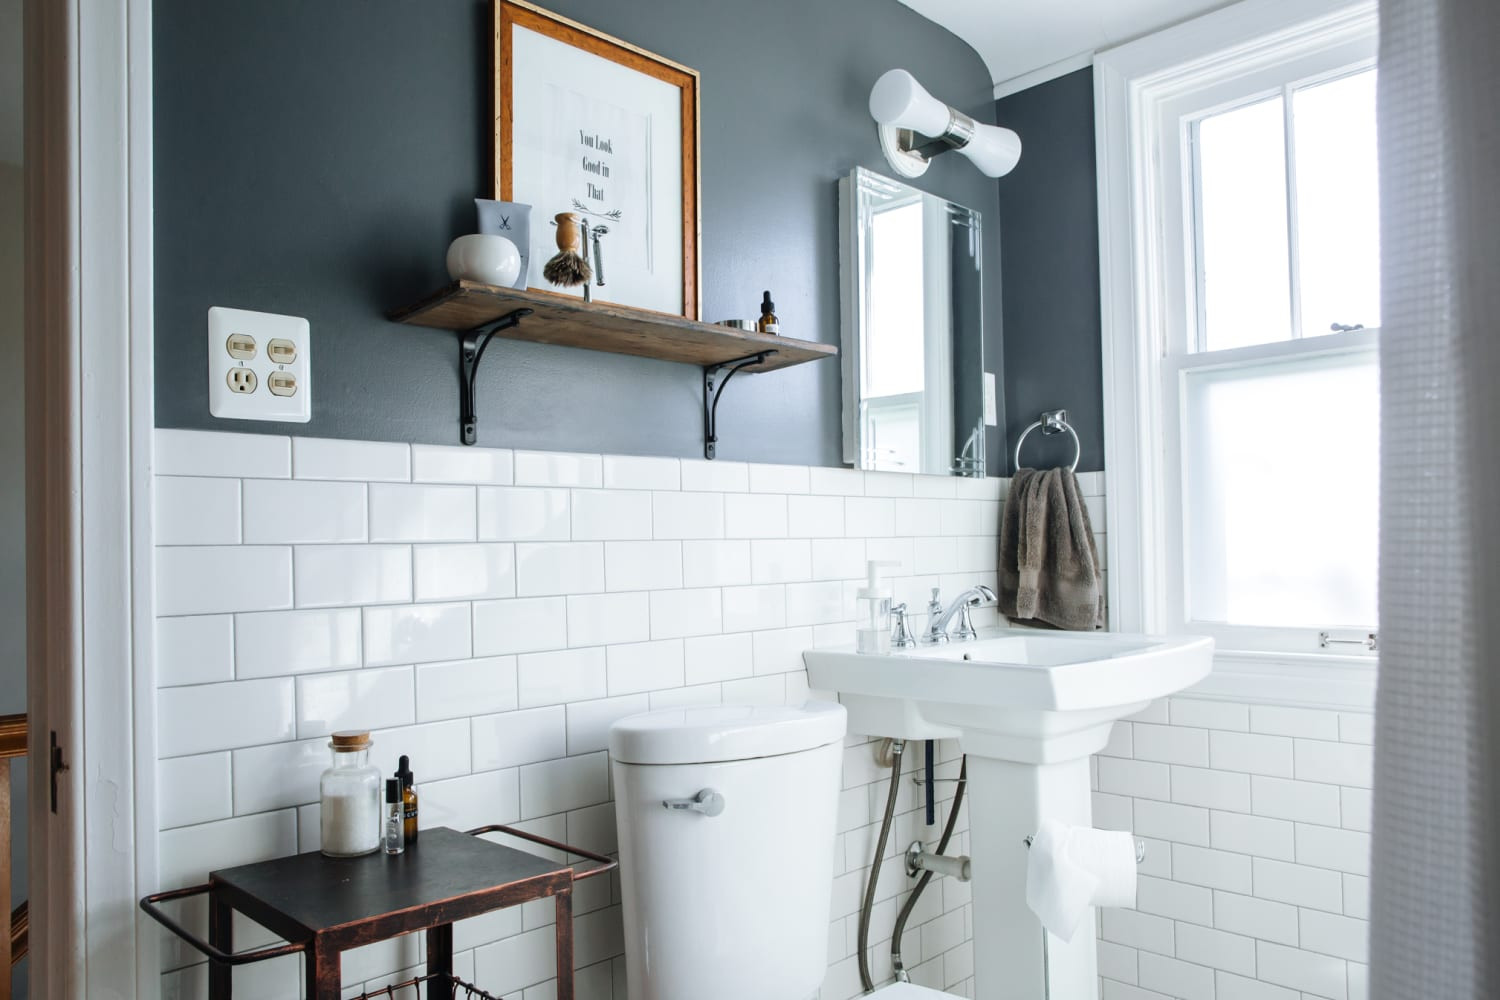 Paint Color For Small Bathroom
 Best Paint Colors for Small Bathrooms